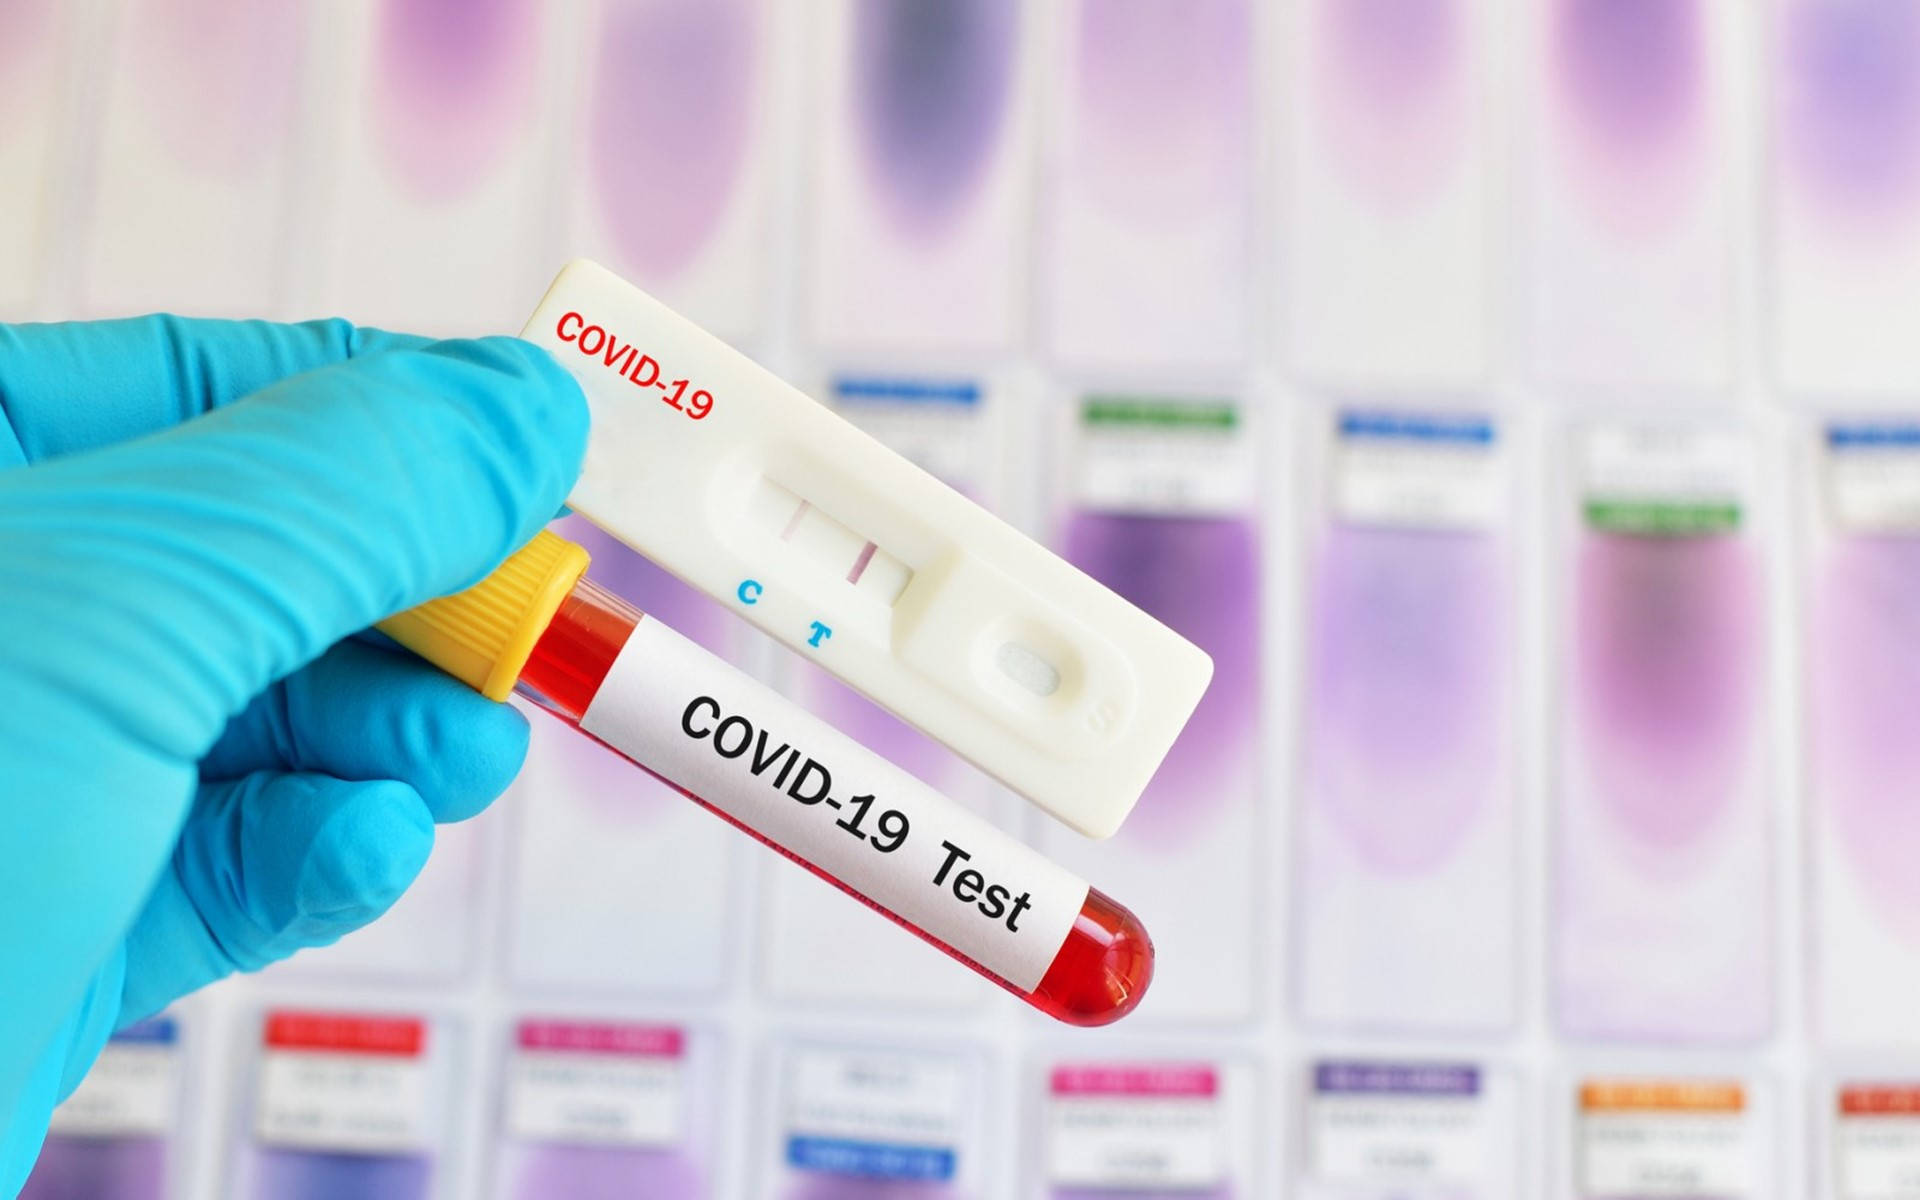 Crucial COVID-19 Test Kit with Red Vial Wallpaper